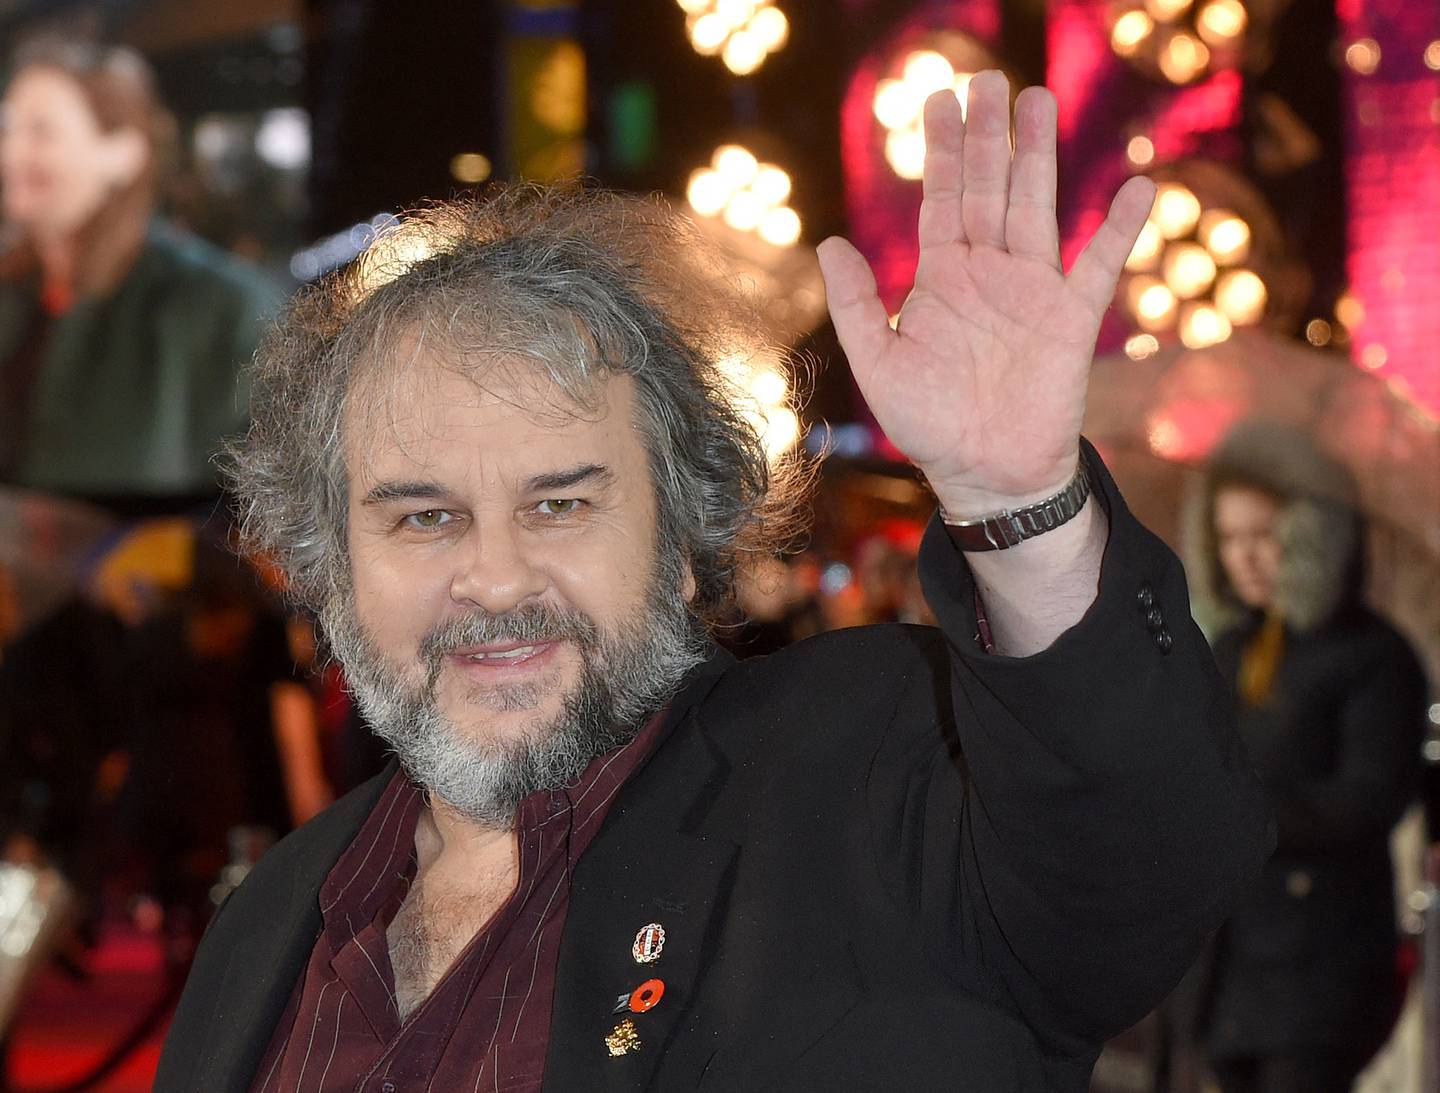 Film director Peter Jackson became a billionaire after last year’s sale of his visual effects studio Weta Digital to US video game company Unity Software for $1.62 billion. AFP